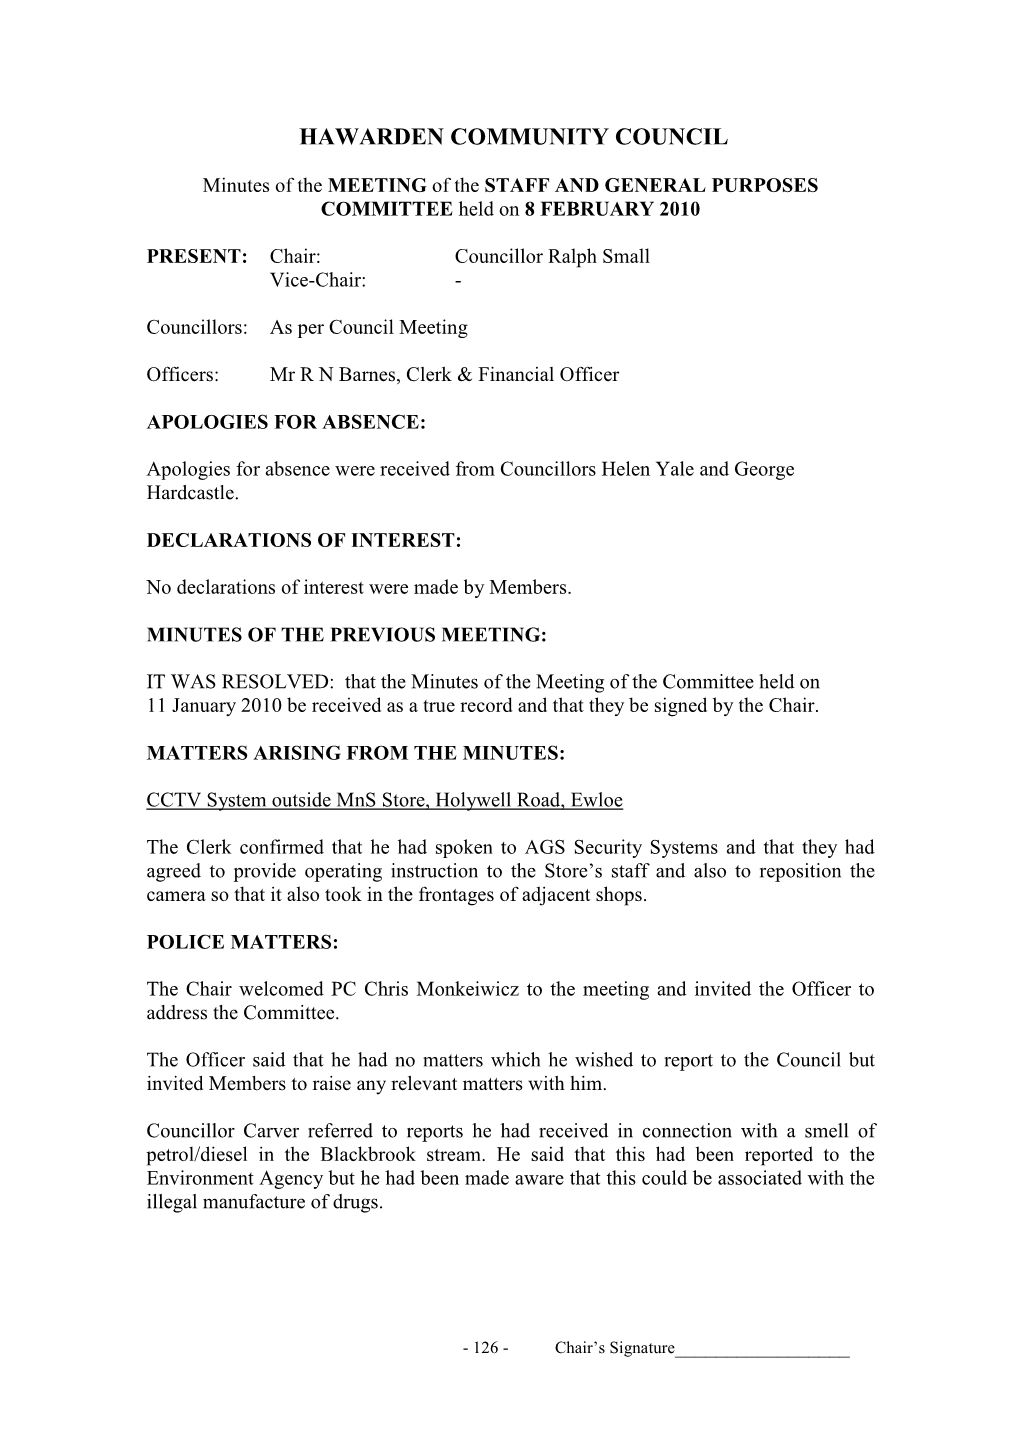 Minutes of the MEETING of the STAFF and GENERAL PURPOSES COMMITTEE Held on 8 FEBRUARY 2010